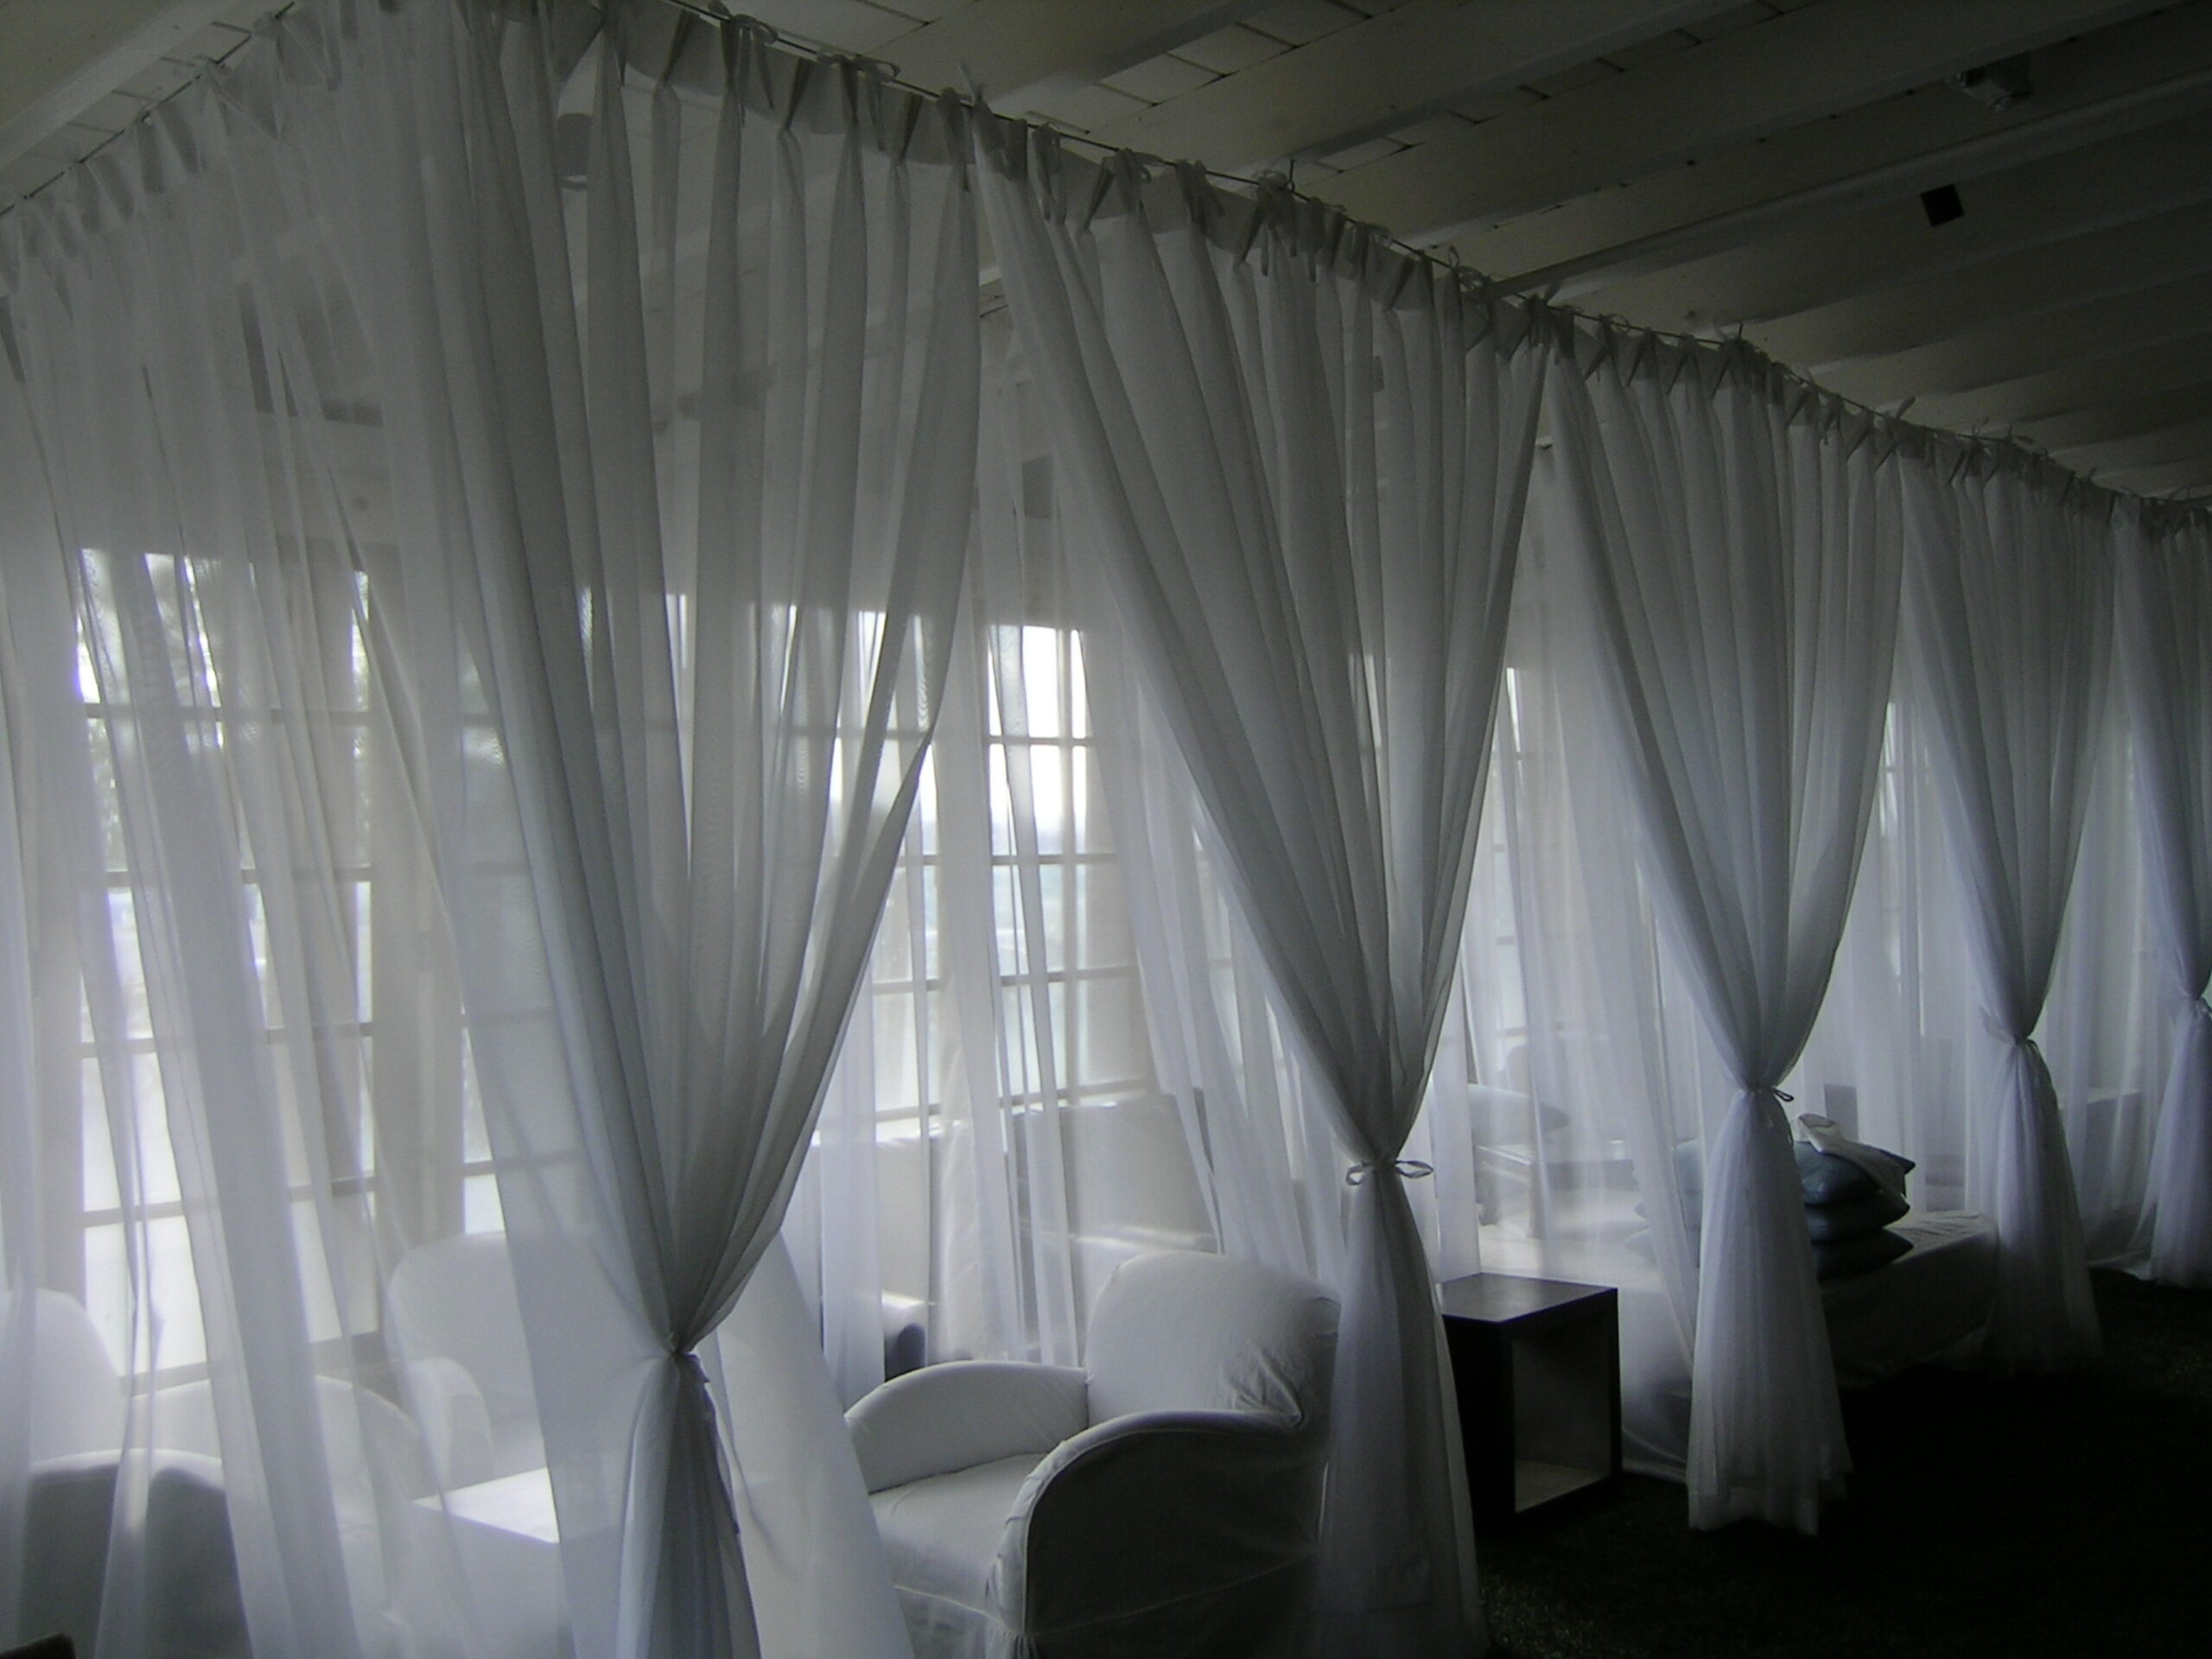 A row of white curtains